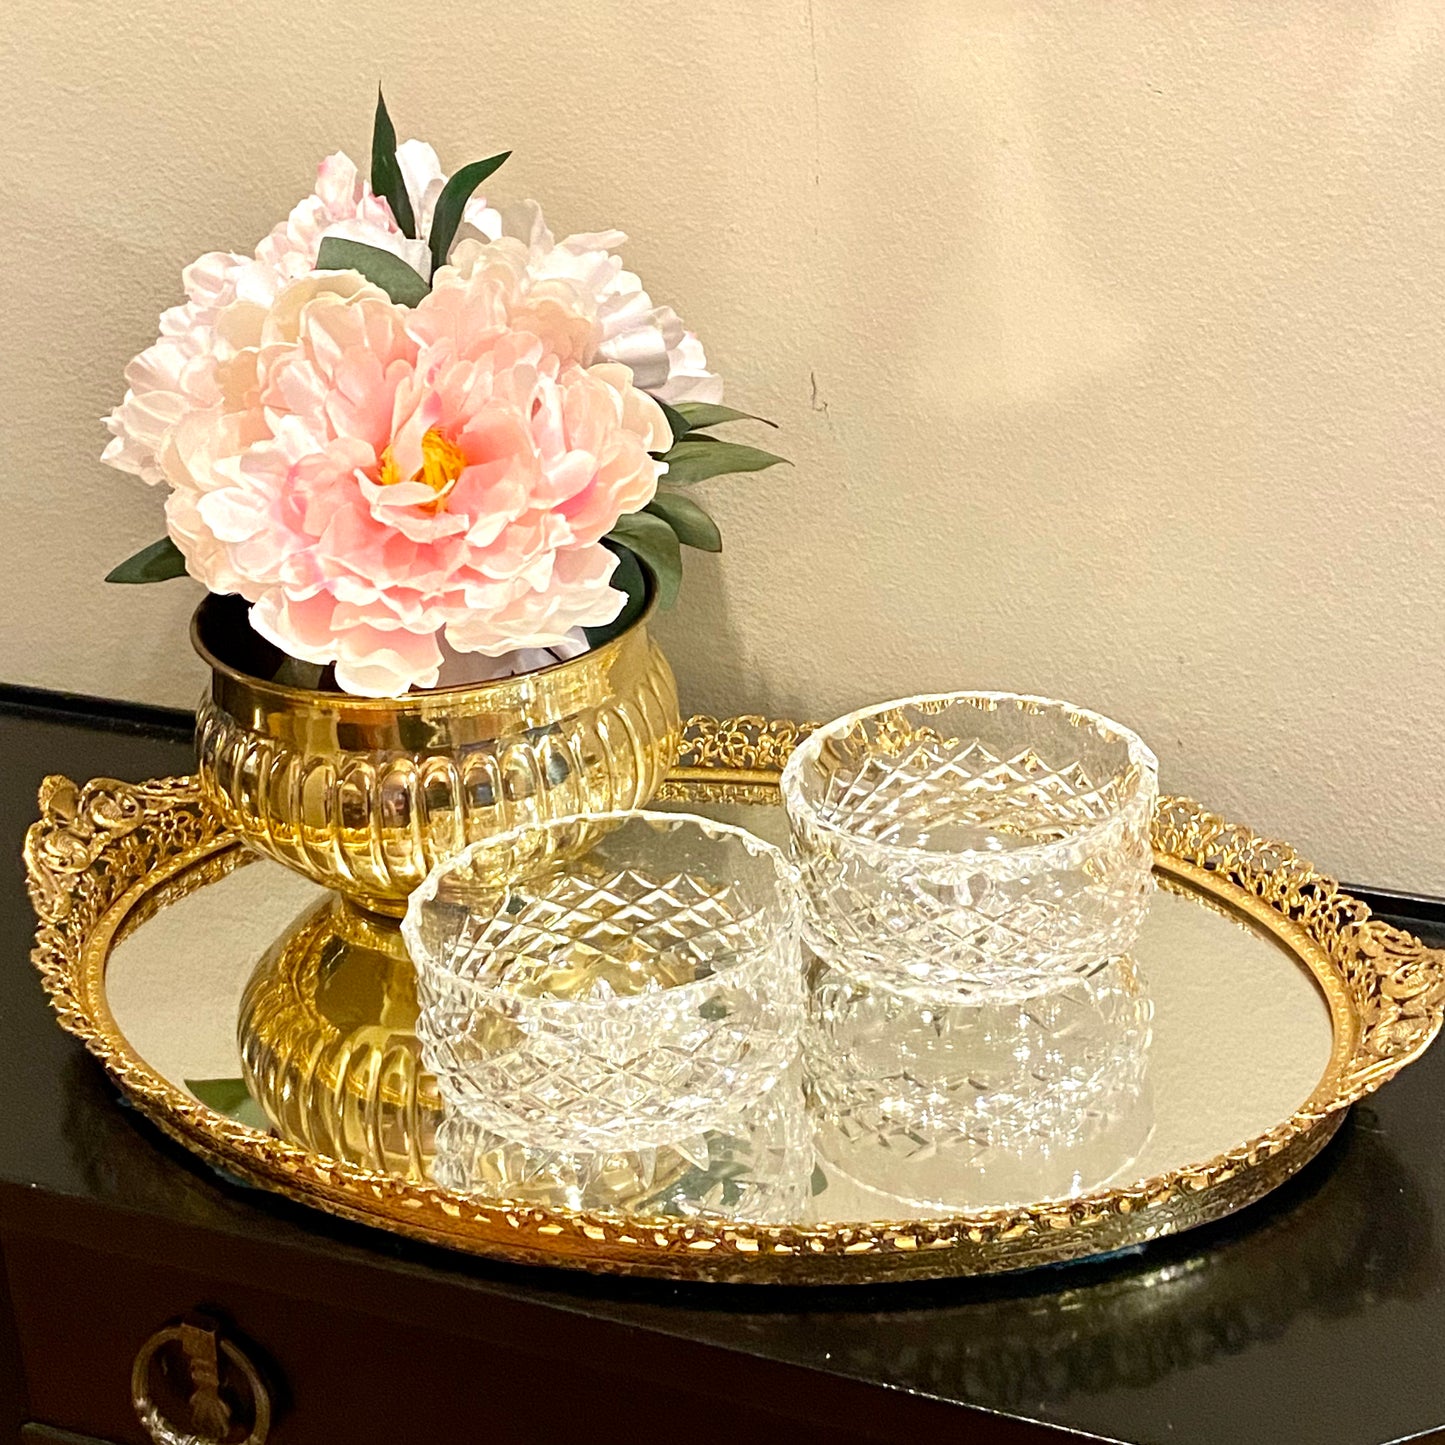 One Sparkling Vintage crystal decorative bowl or candy dish. ( 2 available)